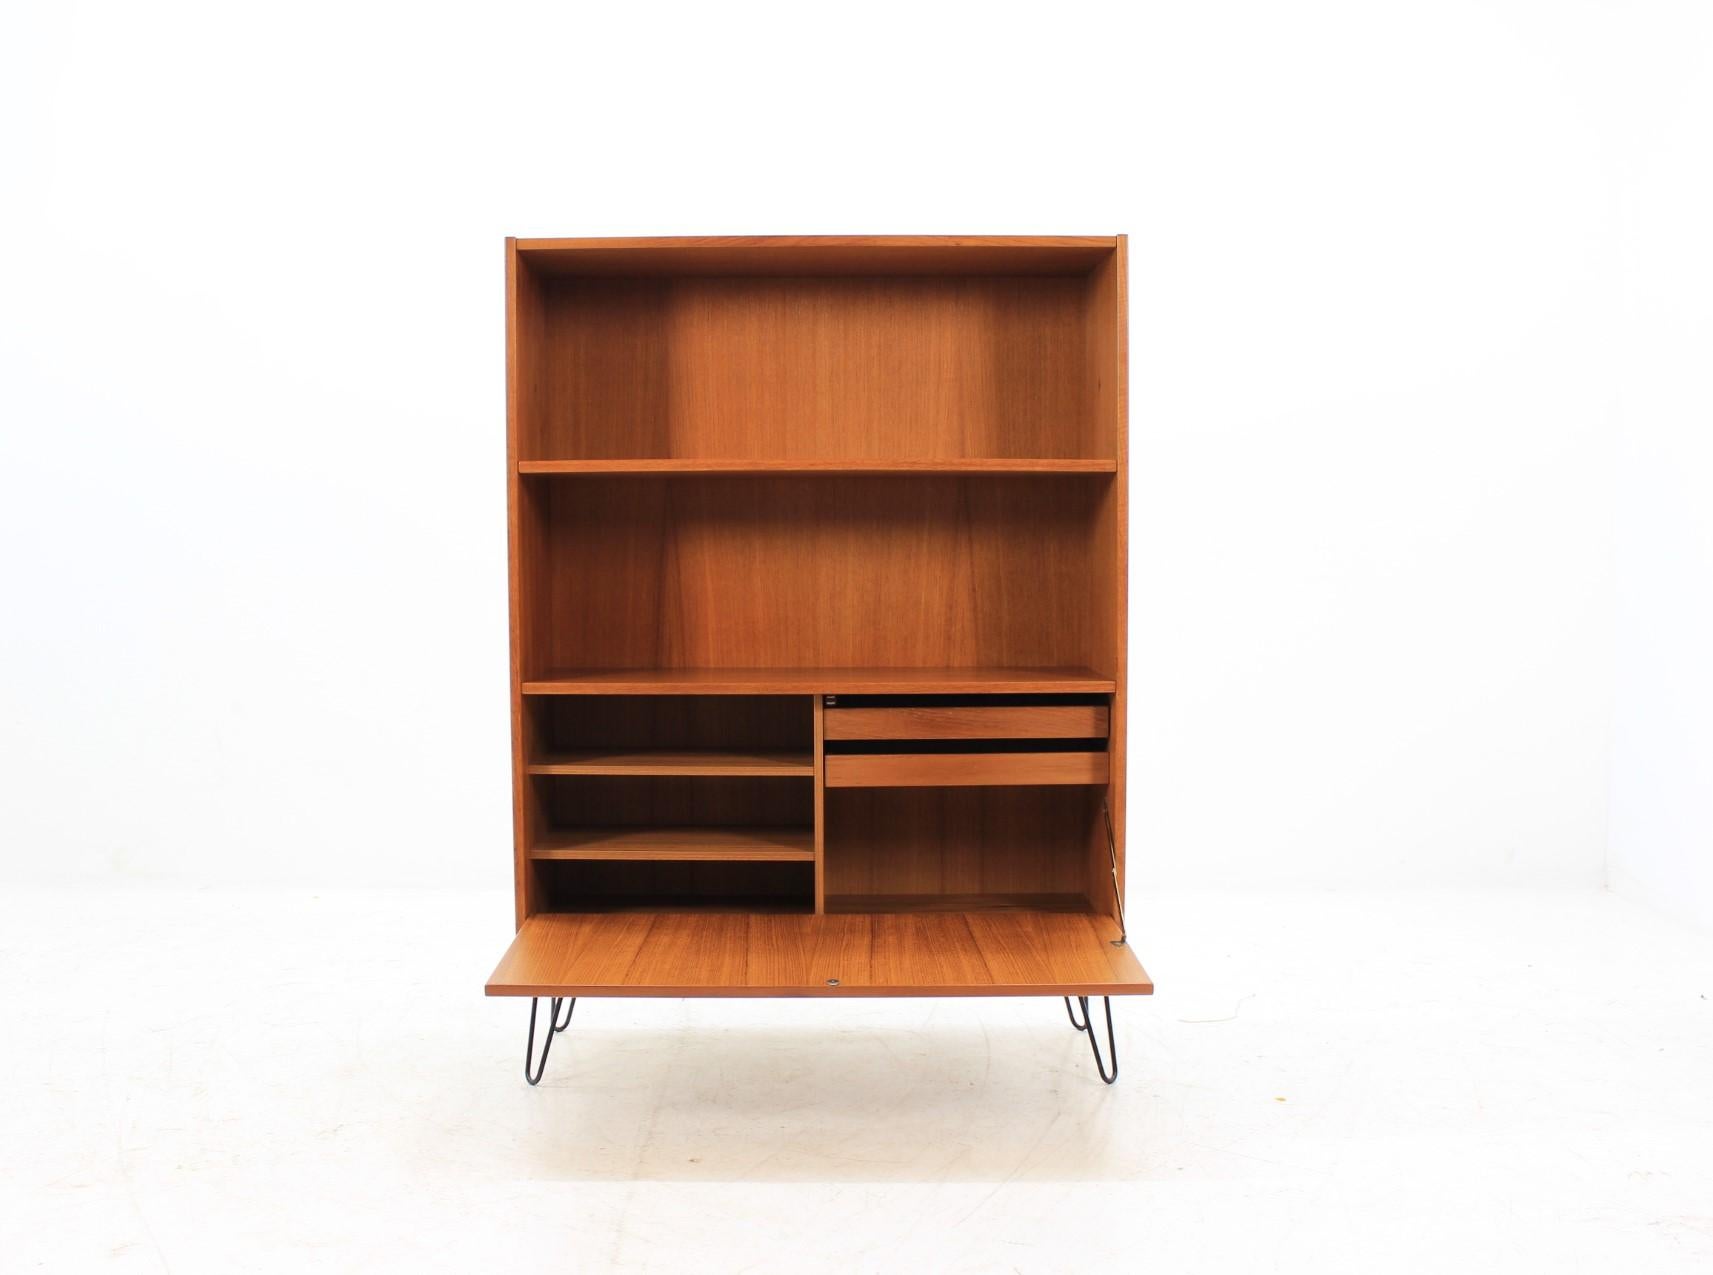 This cabinet/bookcase features one doors, shelves and two small drawers. The hairpin iron legs were added afterwards. This item was carefully refurbished.